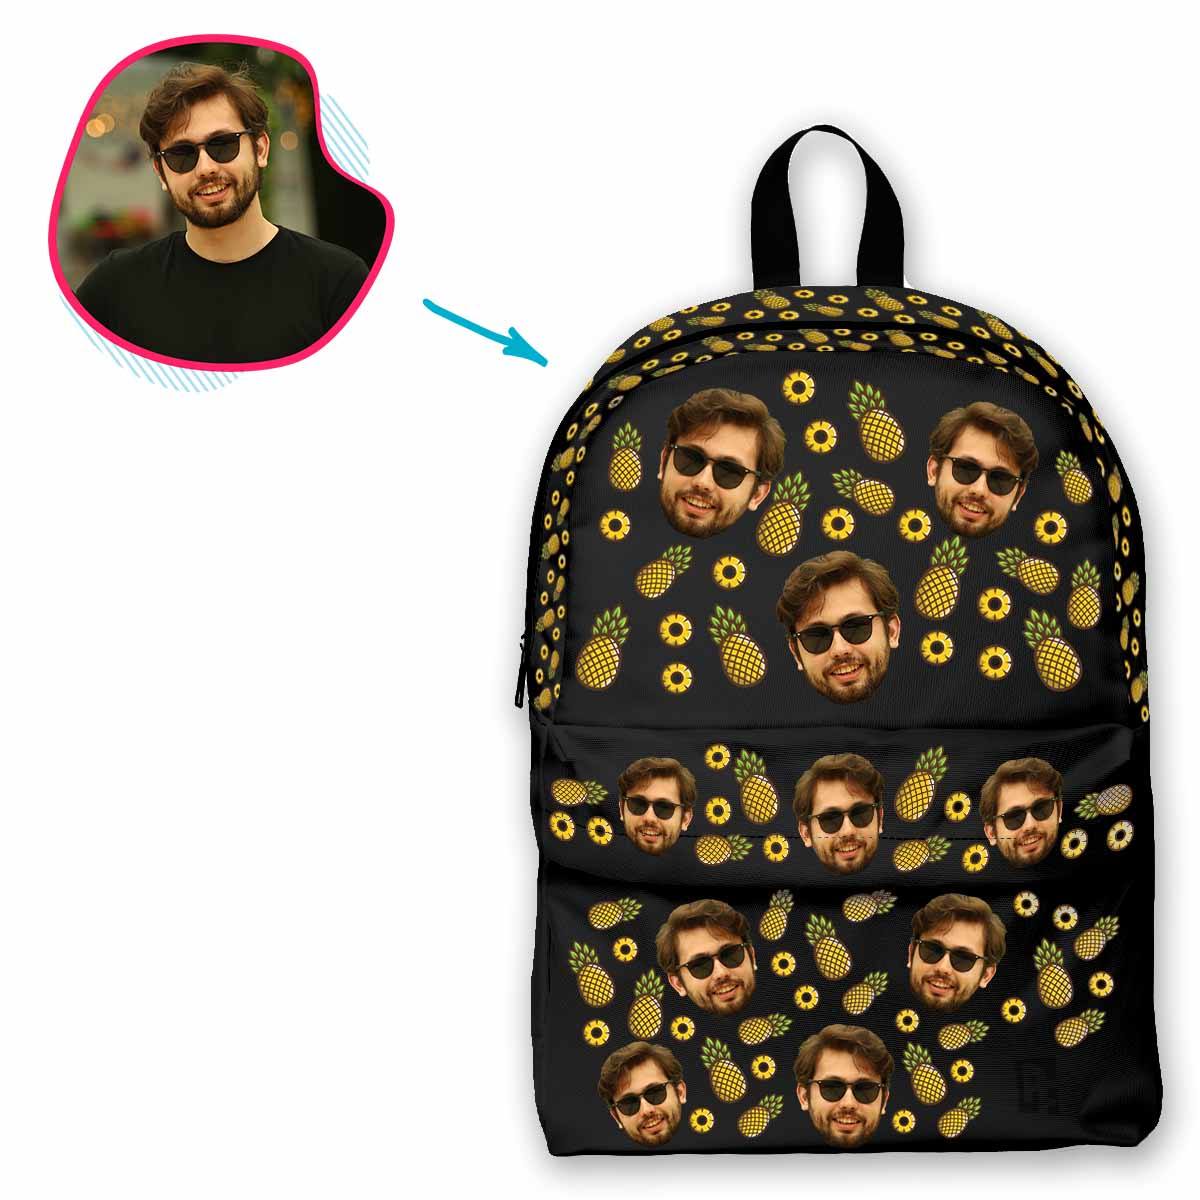 dark Fruits classic backpack personalized with photo of face printed on it